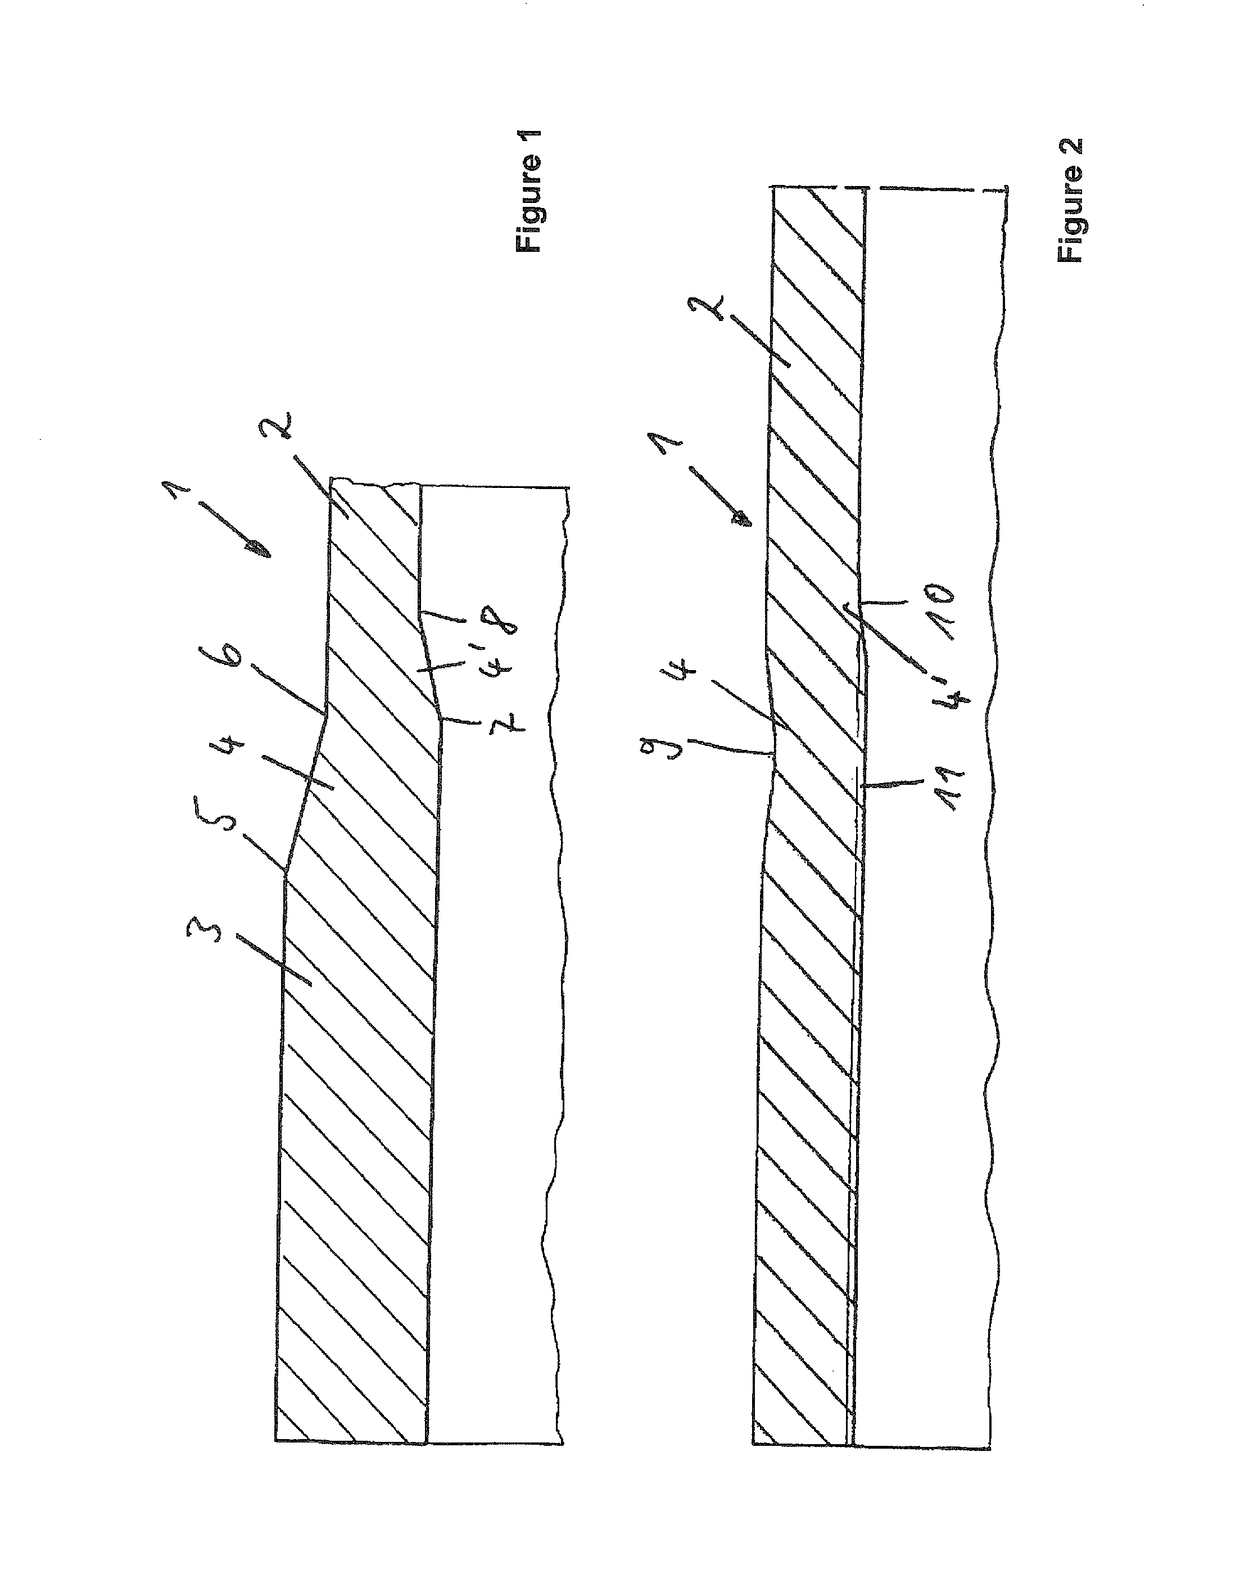 Method for the production of hot-finished seamless pipes having optimized fatigue properties in the welded state